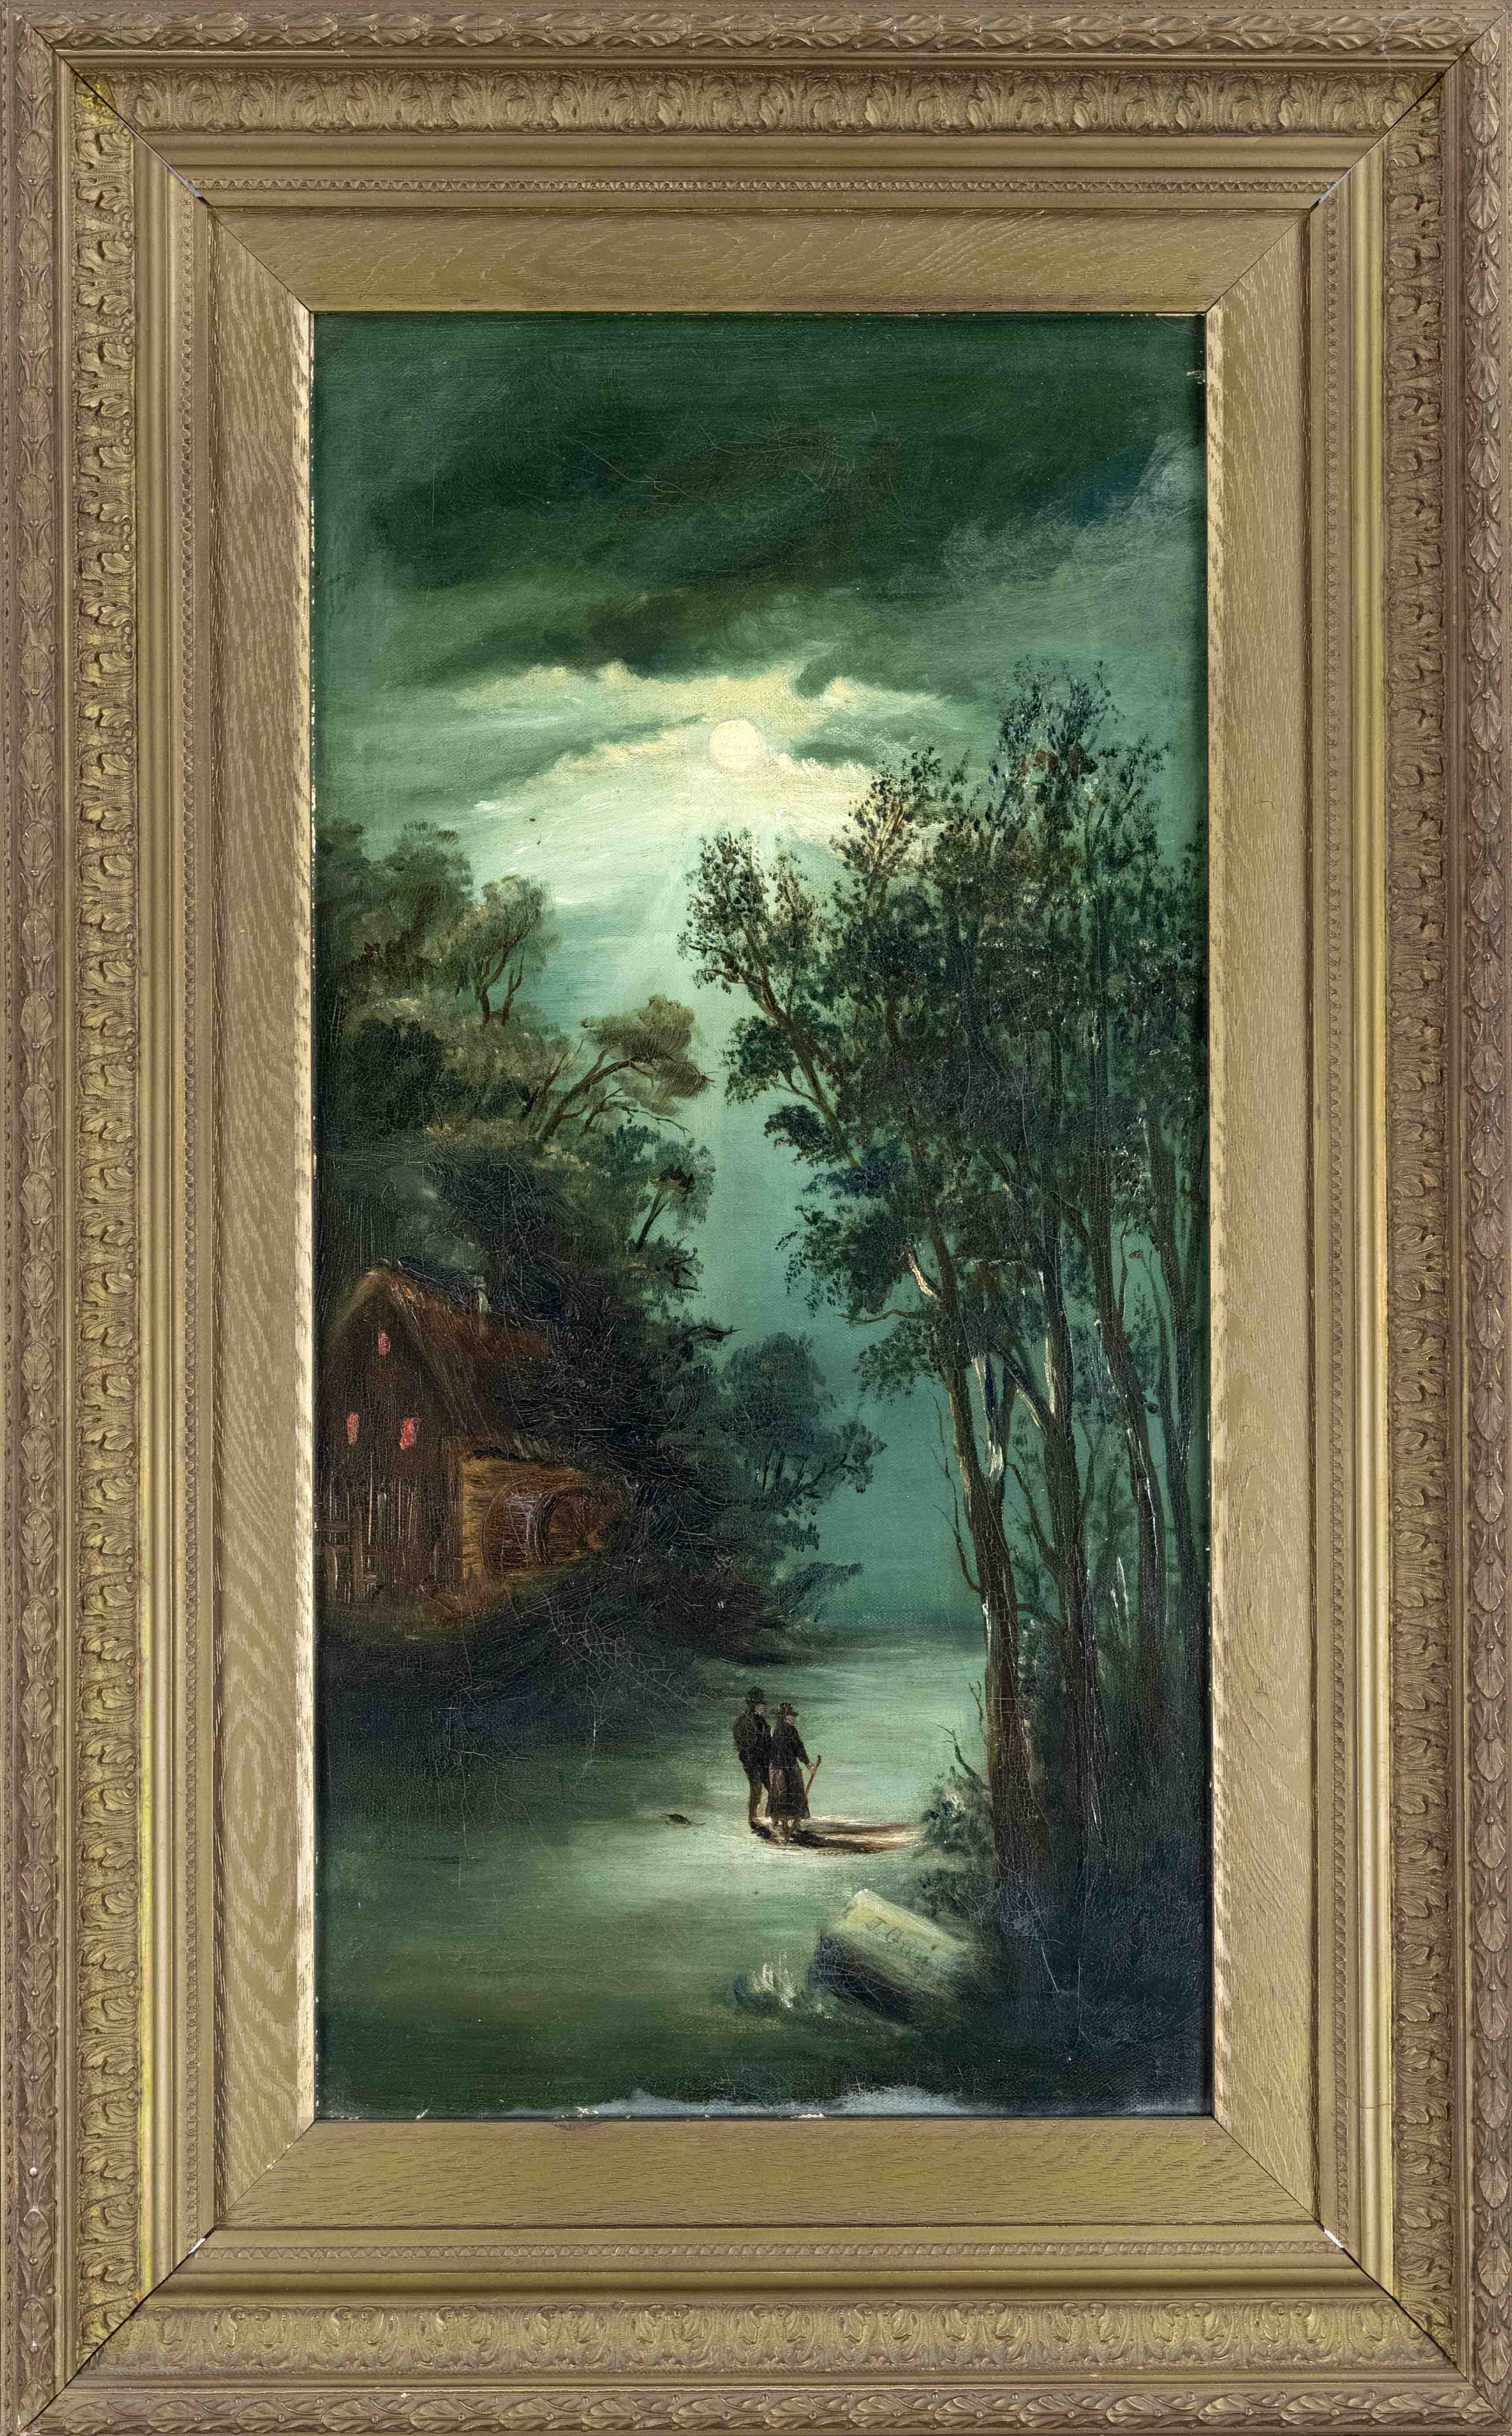 Anonymous painter 2nd half of the 19th century, Forest landscape at full moon with figure